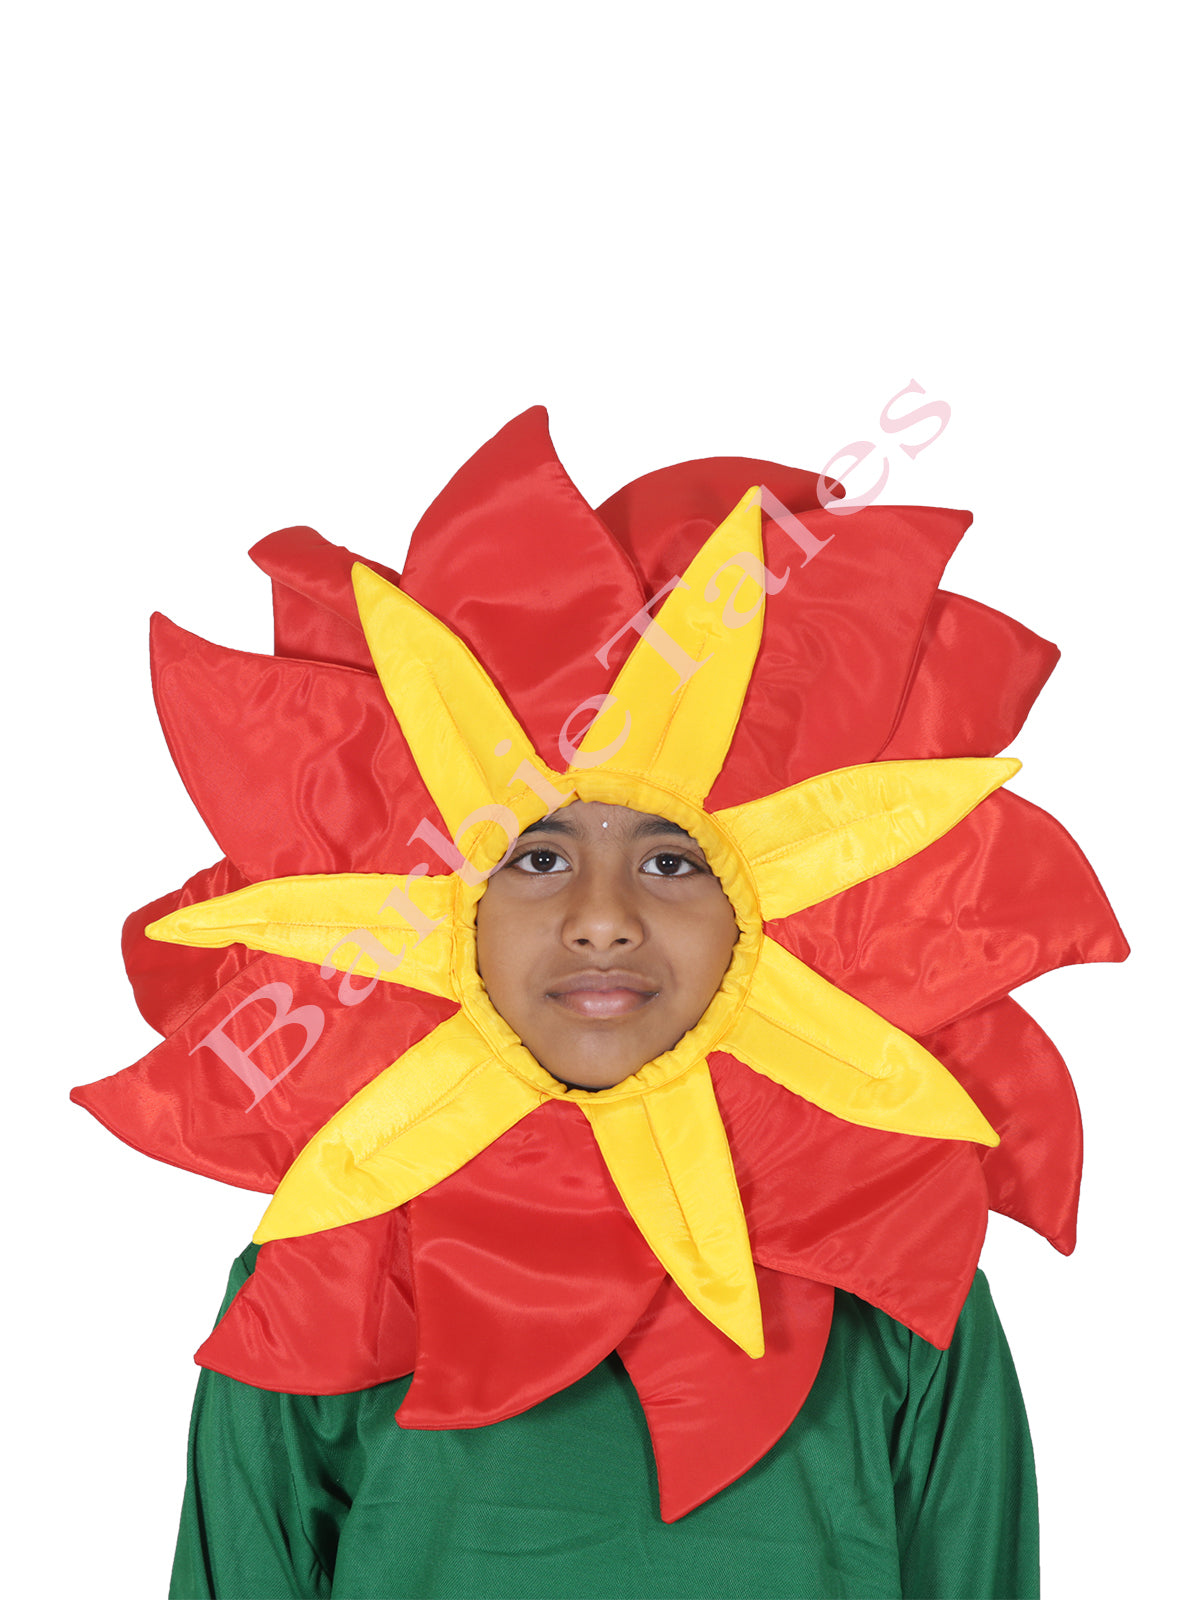 Sunflower Sun Mascot Costume For Adults Perfect For Fancy Dress, Christmas,  Halloween Parties And More! From Qqmall, $146.18 | DHgate.Com